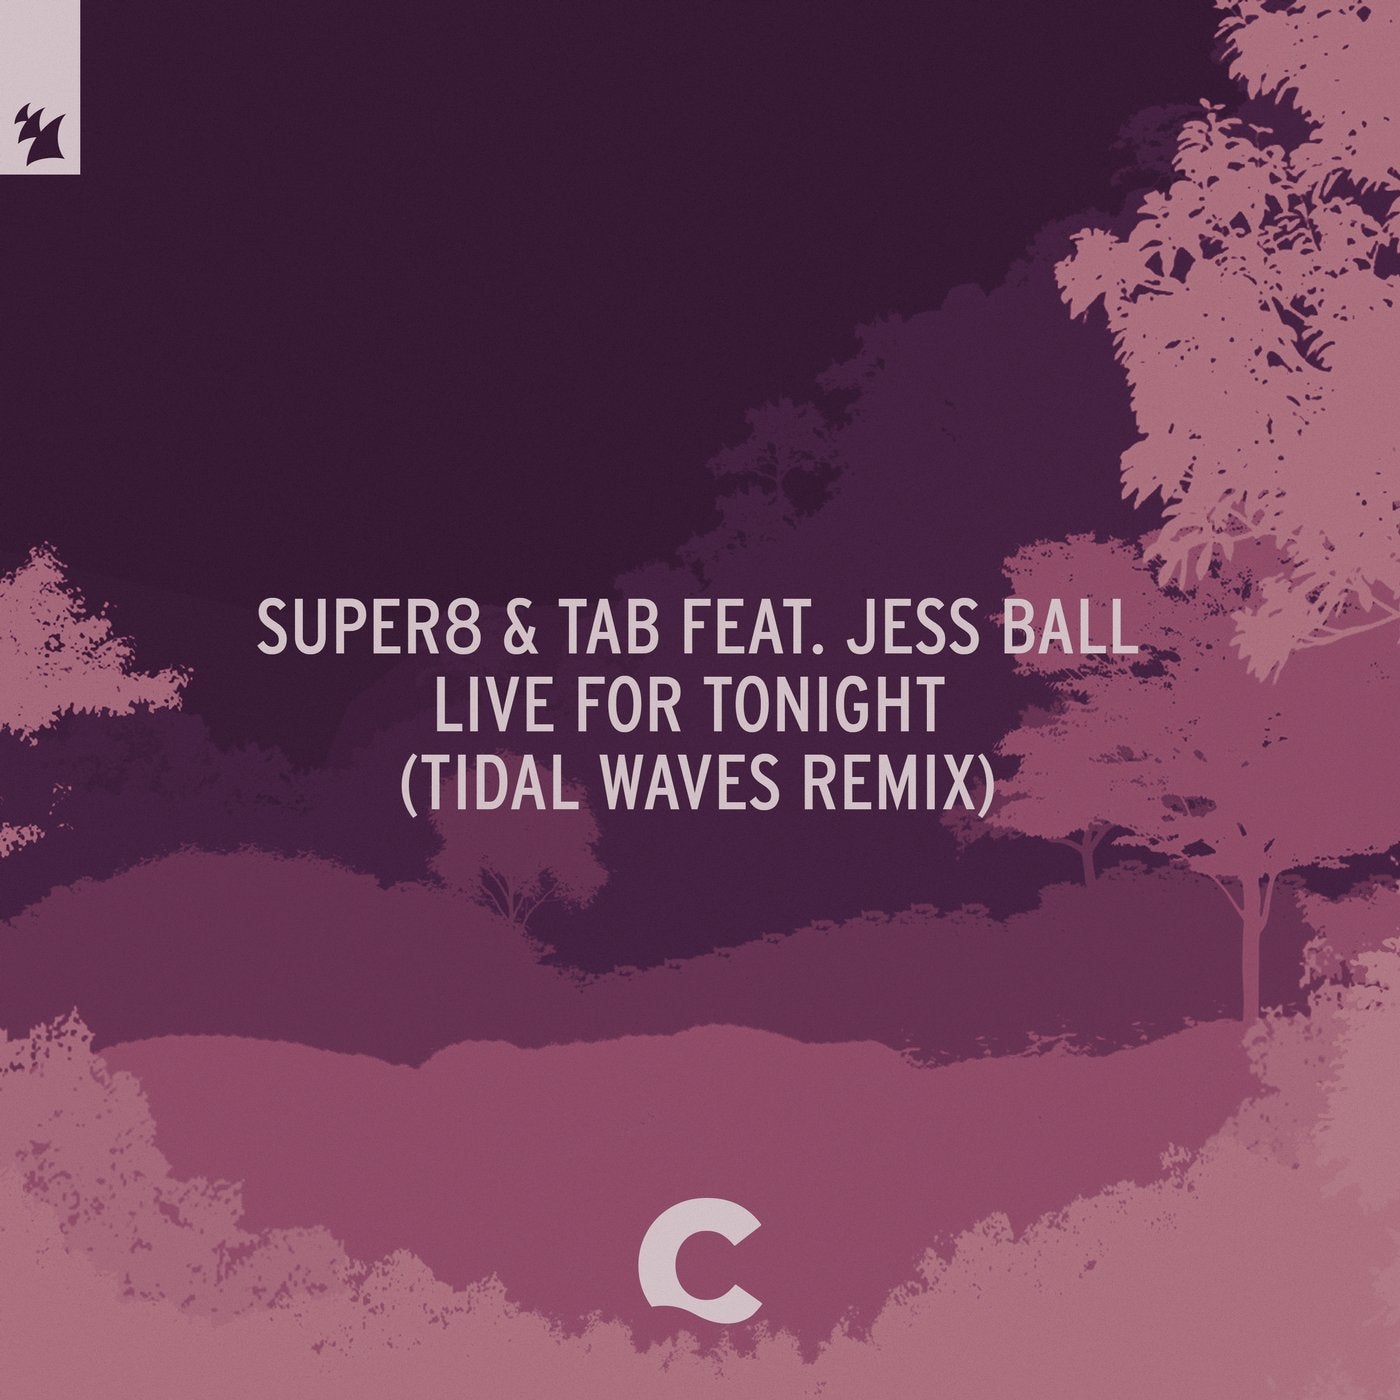 Live For Tonight - Tidal Waves Remix